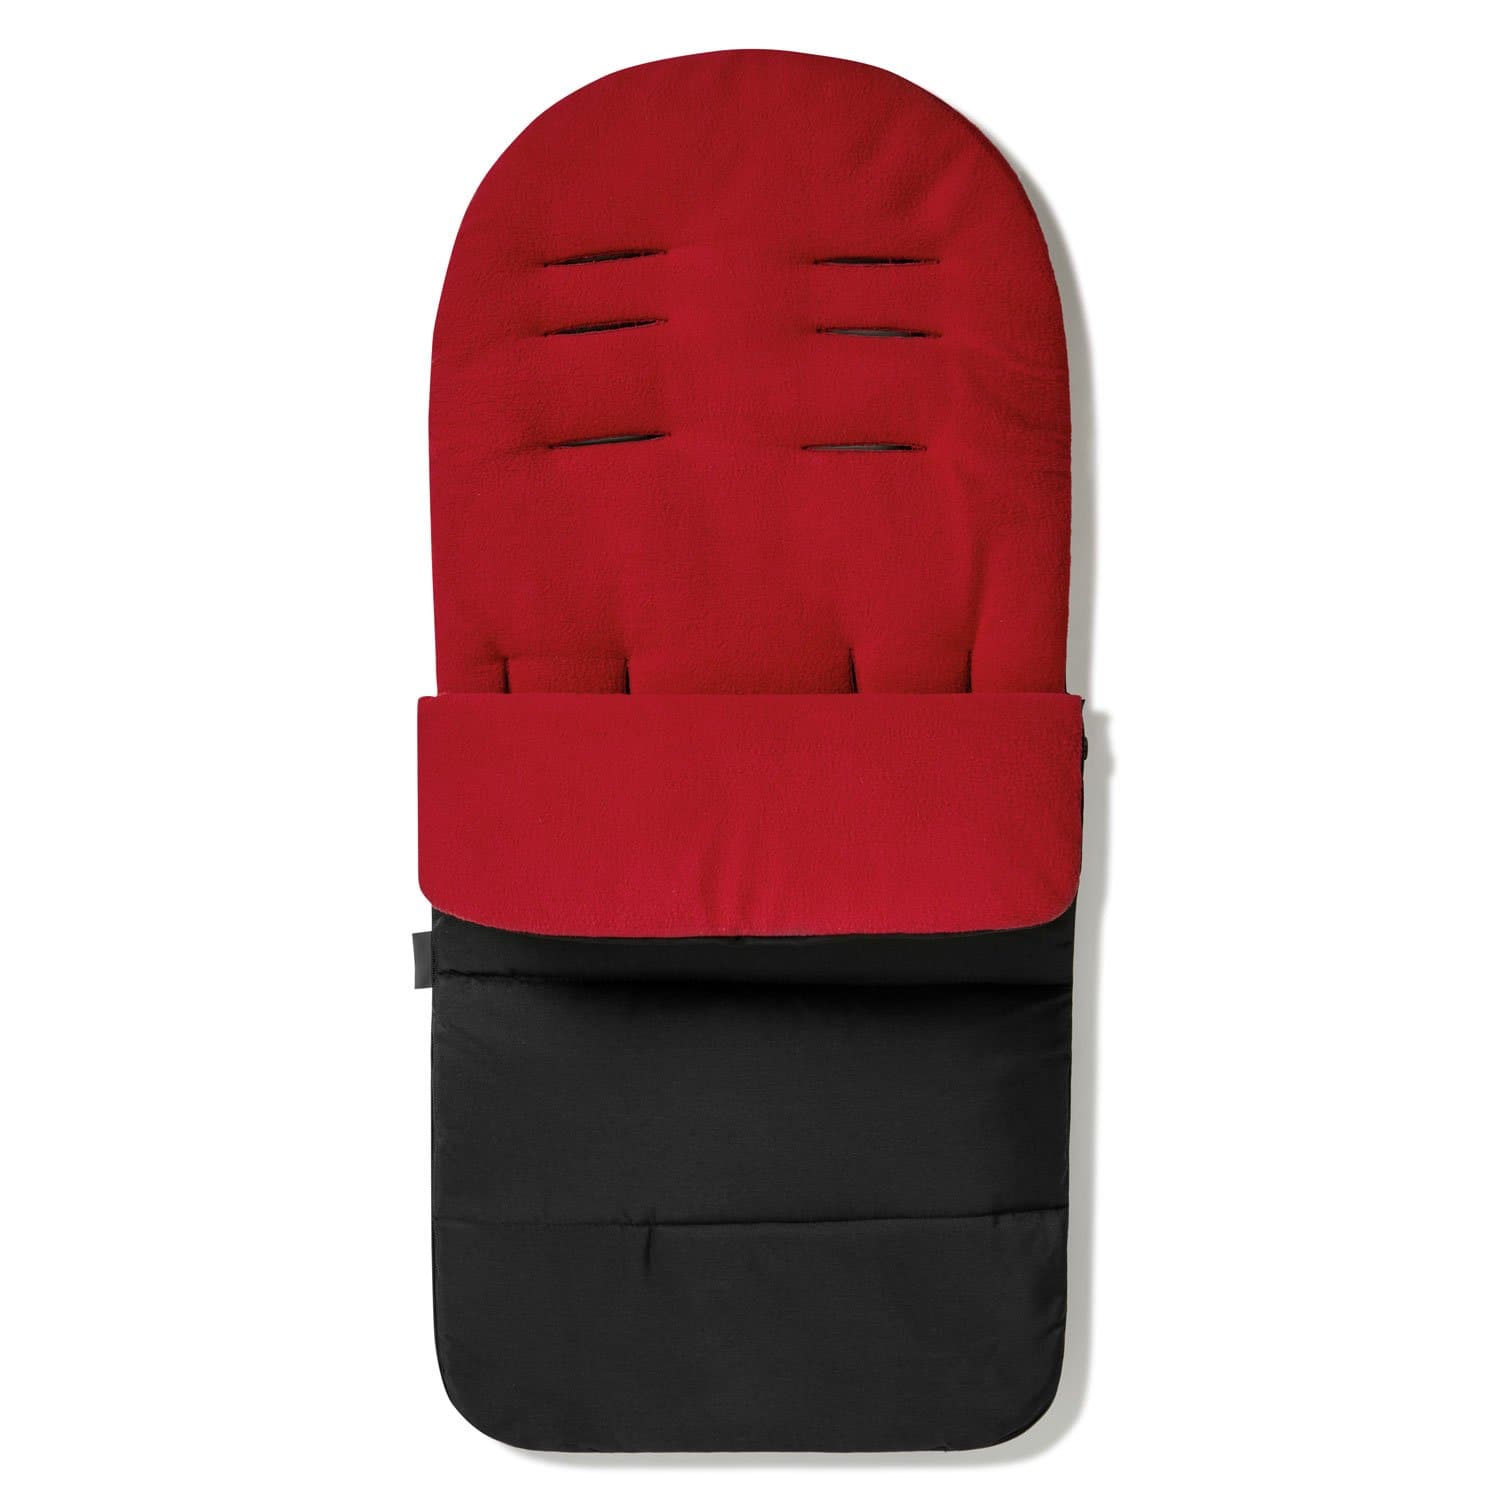 Universal Premium Pushchair Footmuff / Cosy Toes - Fits All Pushchairs / Prams And Buggies - Fire Red / Fits All Models | For Your Little One